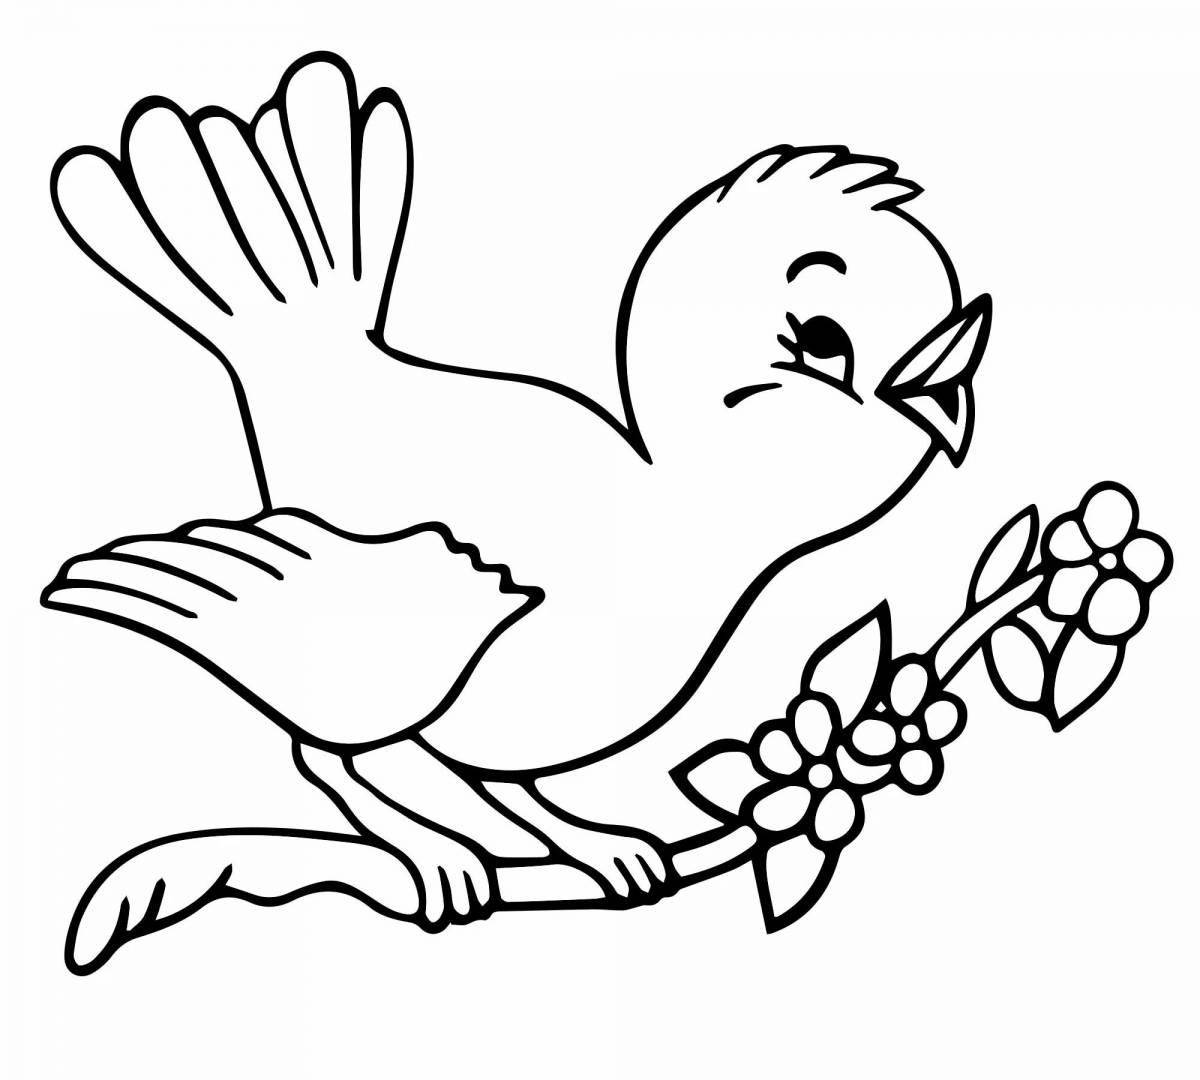 Playful Sparrow Coloring Page for Toddlers